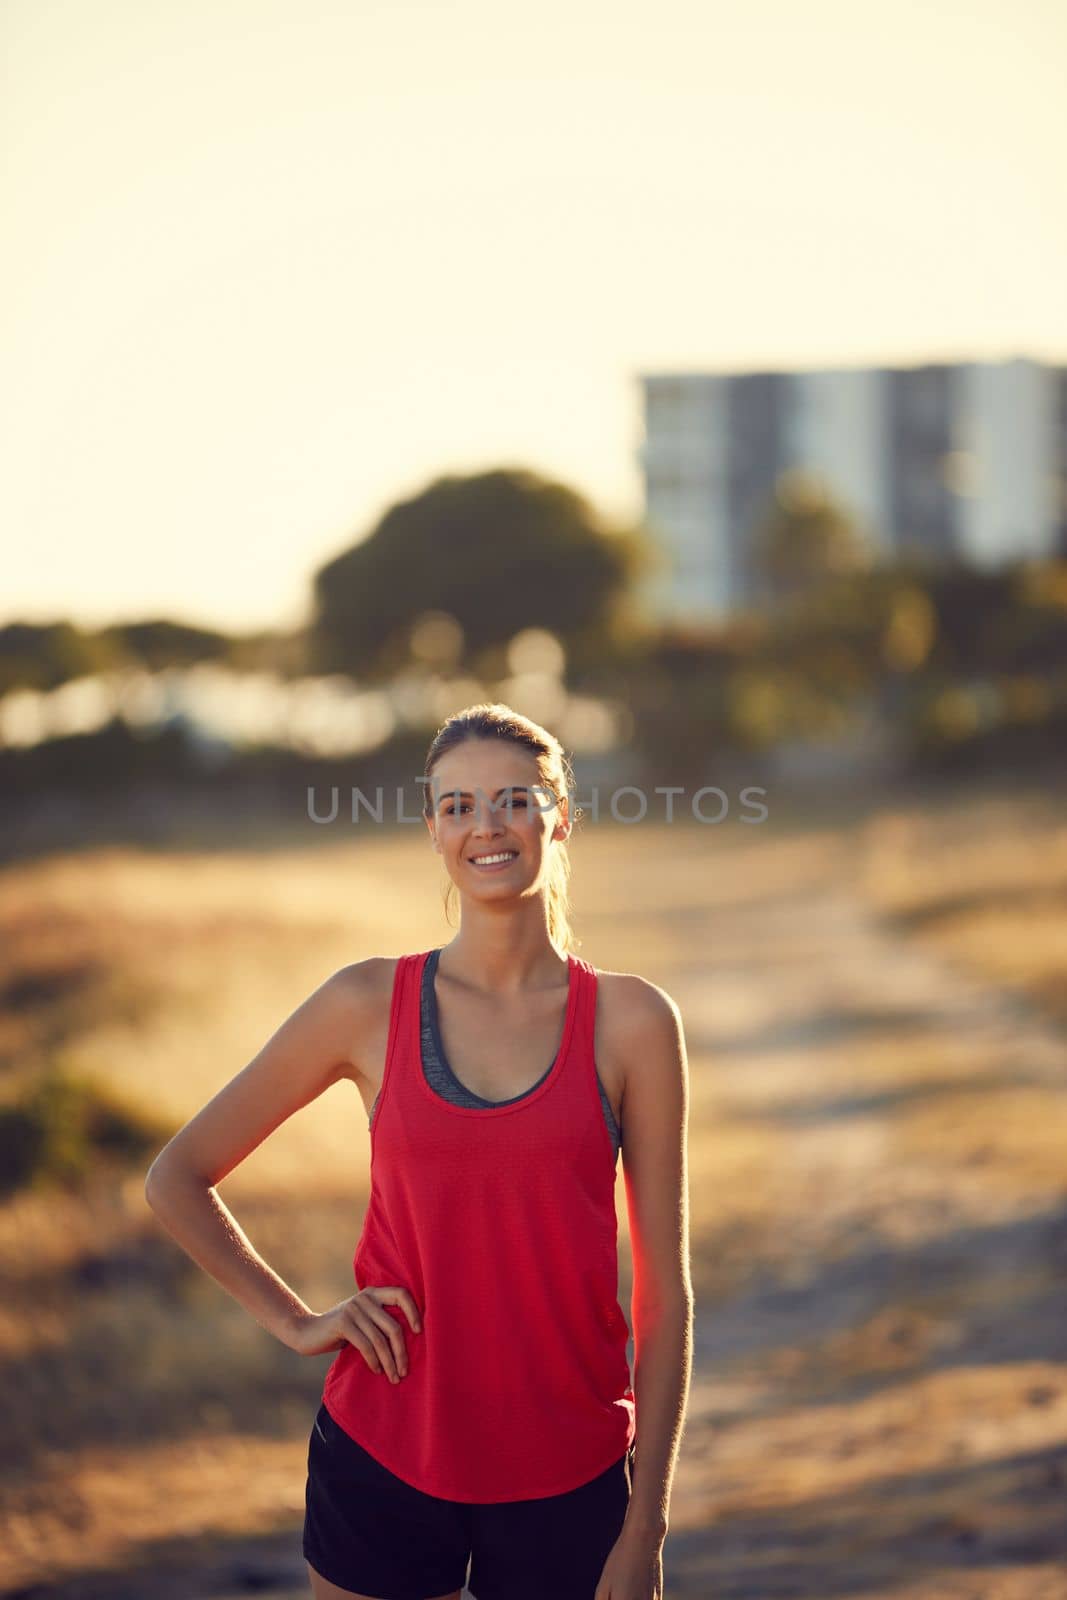 Today is about getting into top form. Portrait of a sporty young woman exercising outdoors